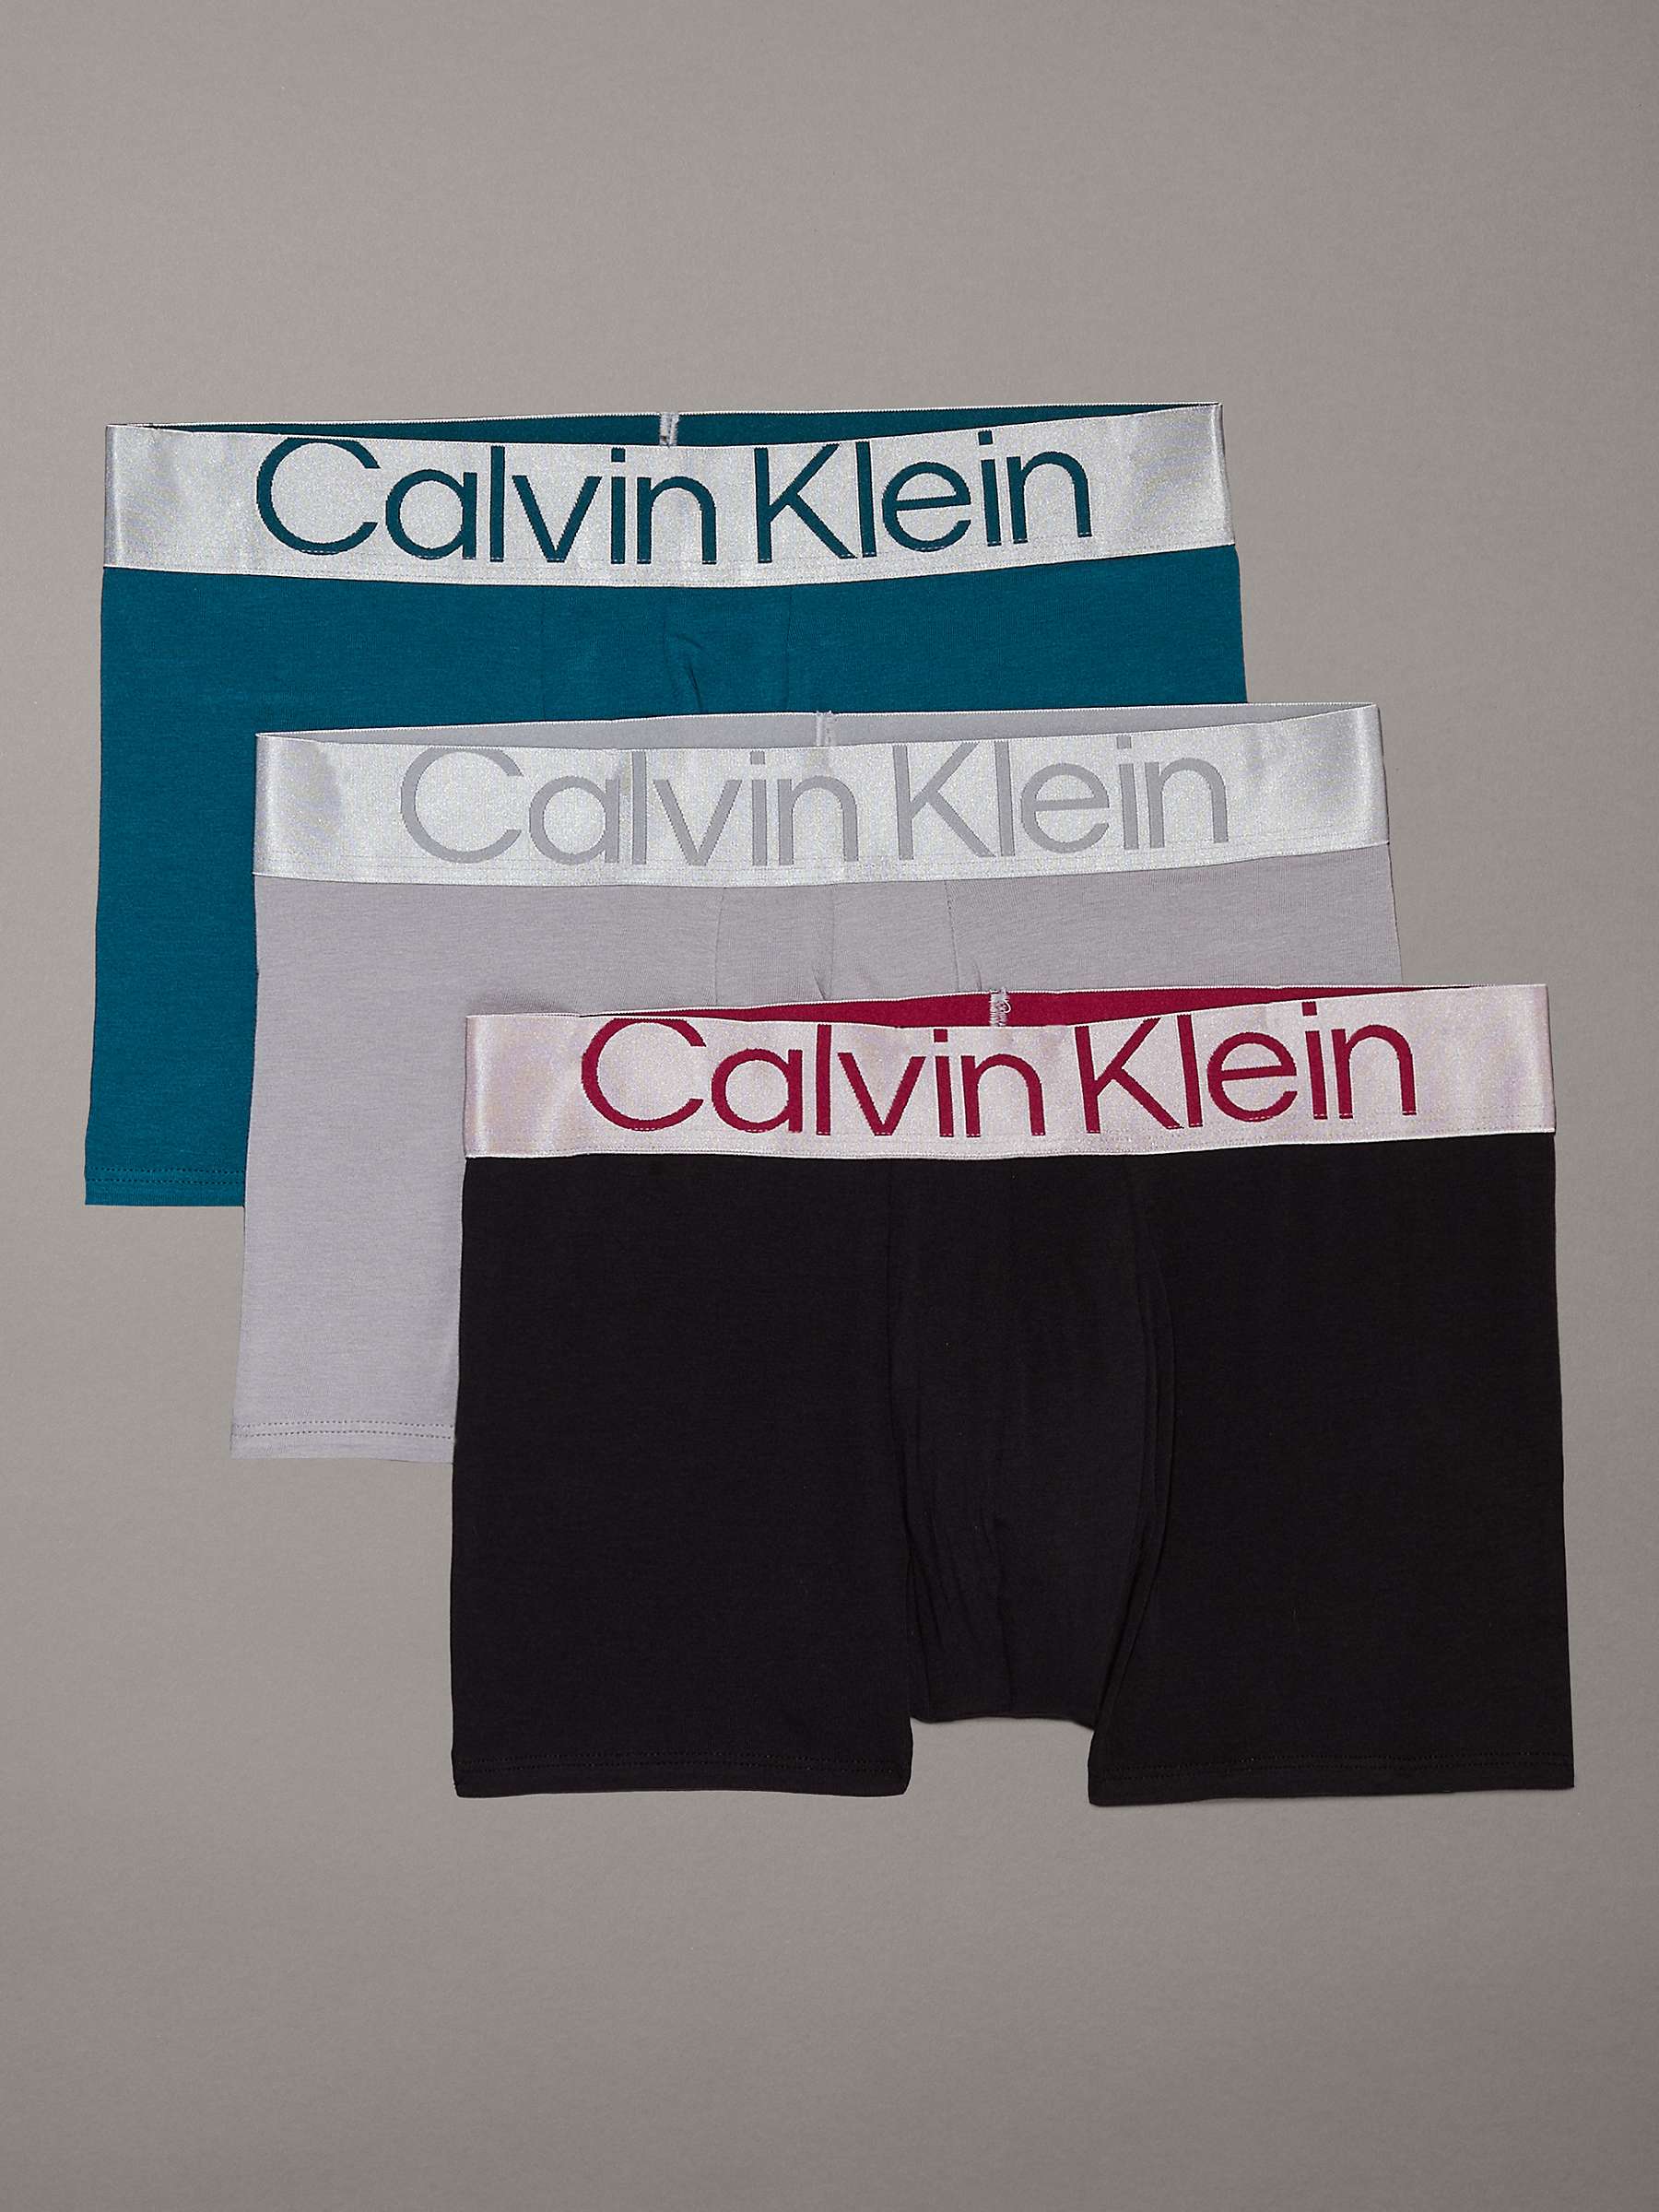 Buy Calvin Klein Classic Trunks, Pack of 3 Online at johnlewis.com